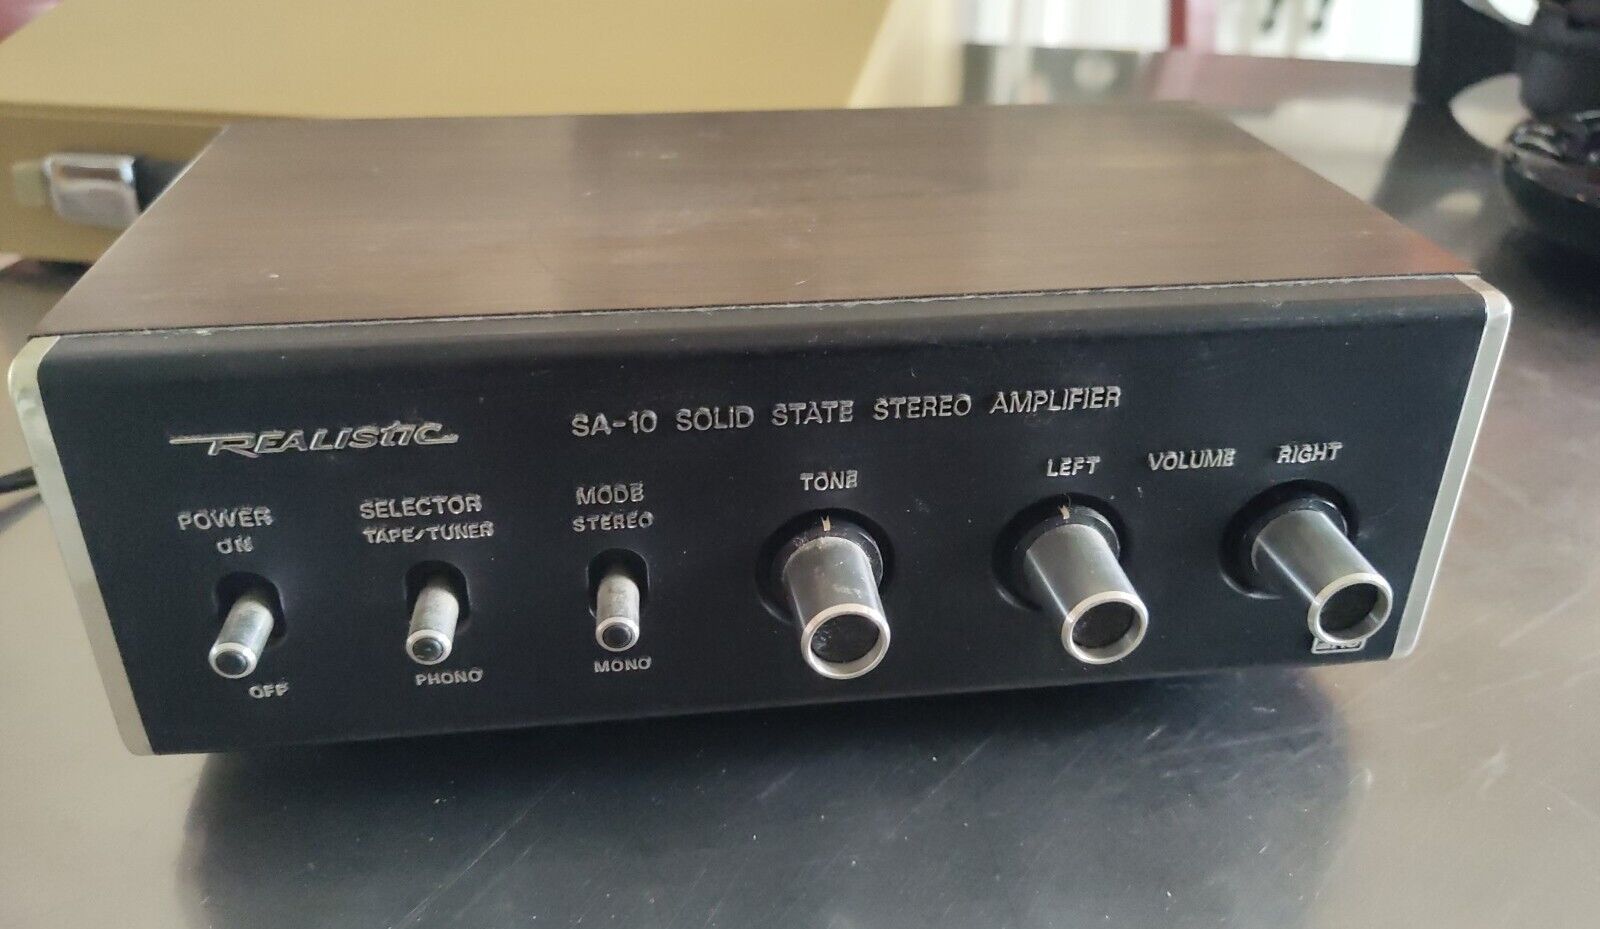 Vintage Realistic SA-10 Solid State Stereo Amplifier Radio Shack Excellent!